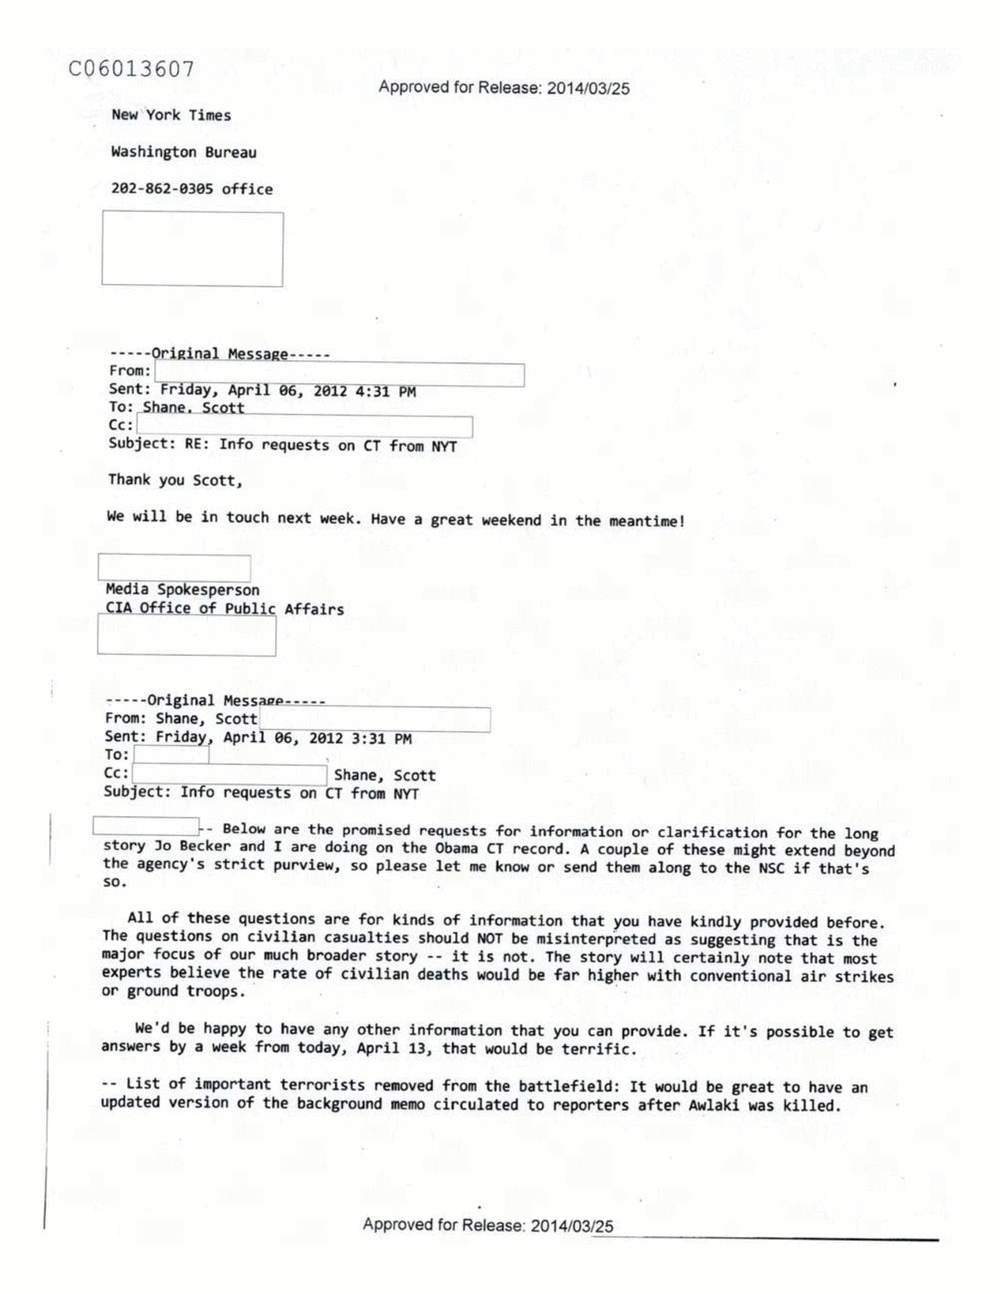 Page 417 from Email Correspondence Between Reporters and CIA Flacks